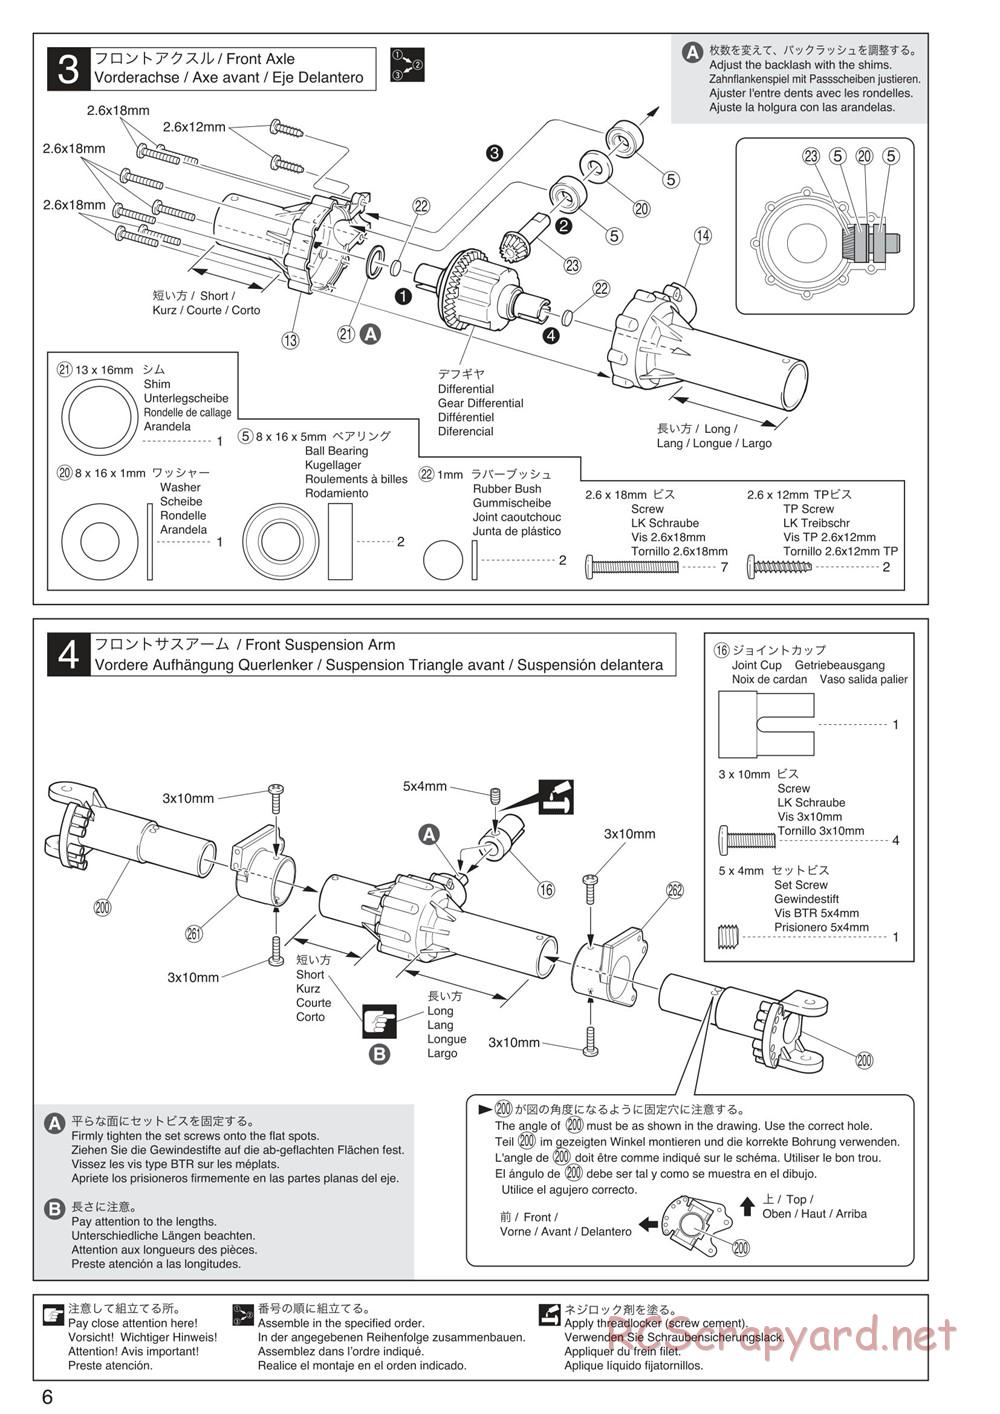 Kyosho - Mad Crusher VE - Manual - Page 6